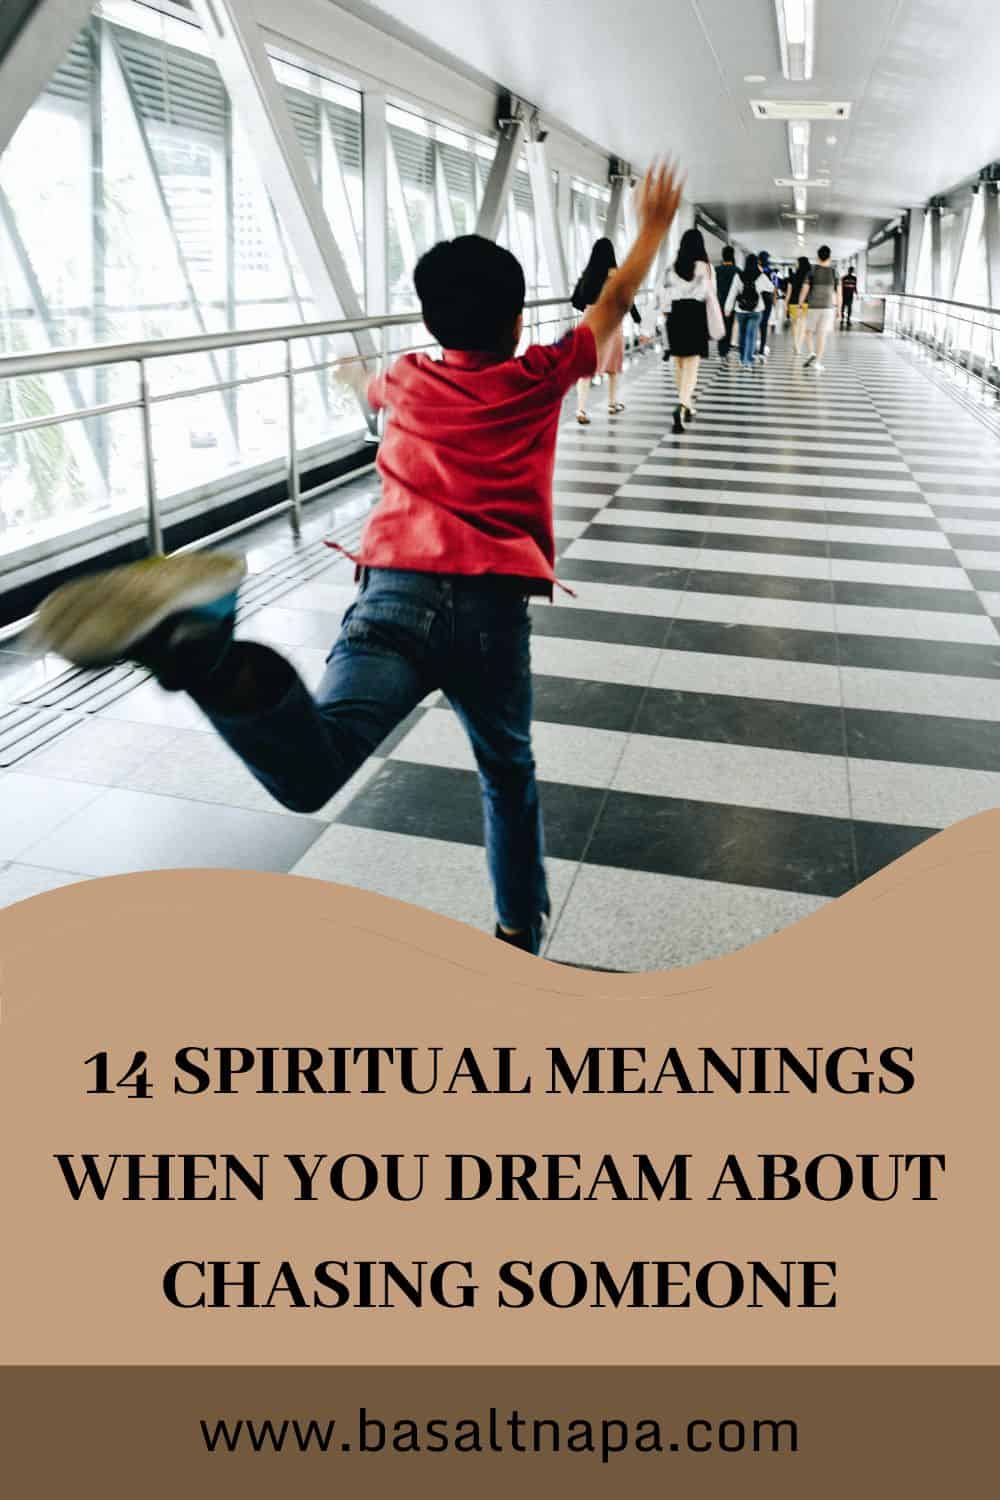 14 Spiritual Meanings When You Dream About Chasing Someone